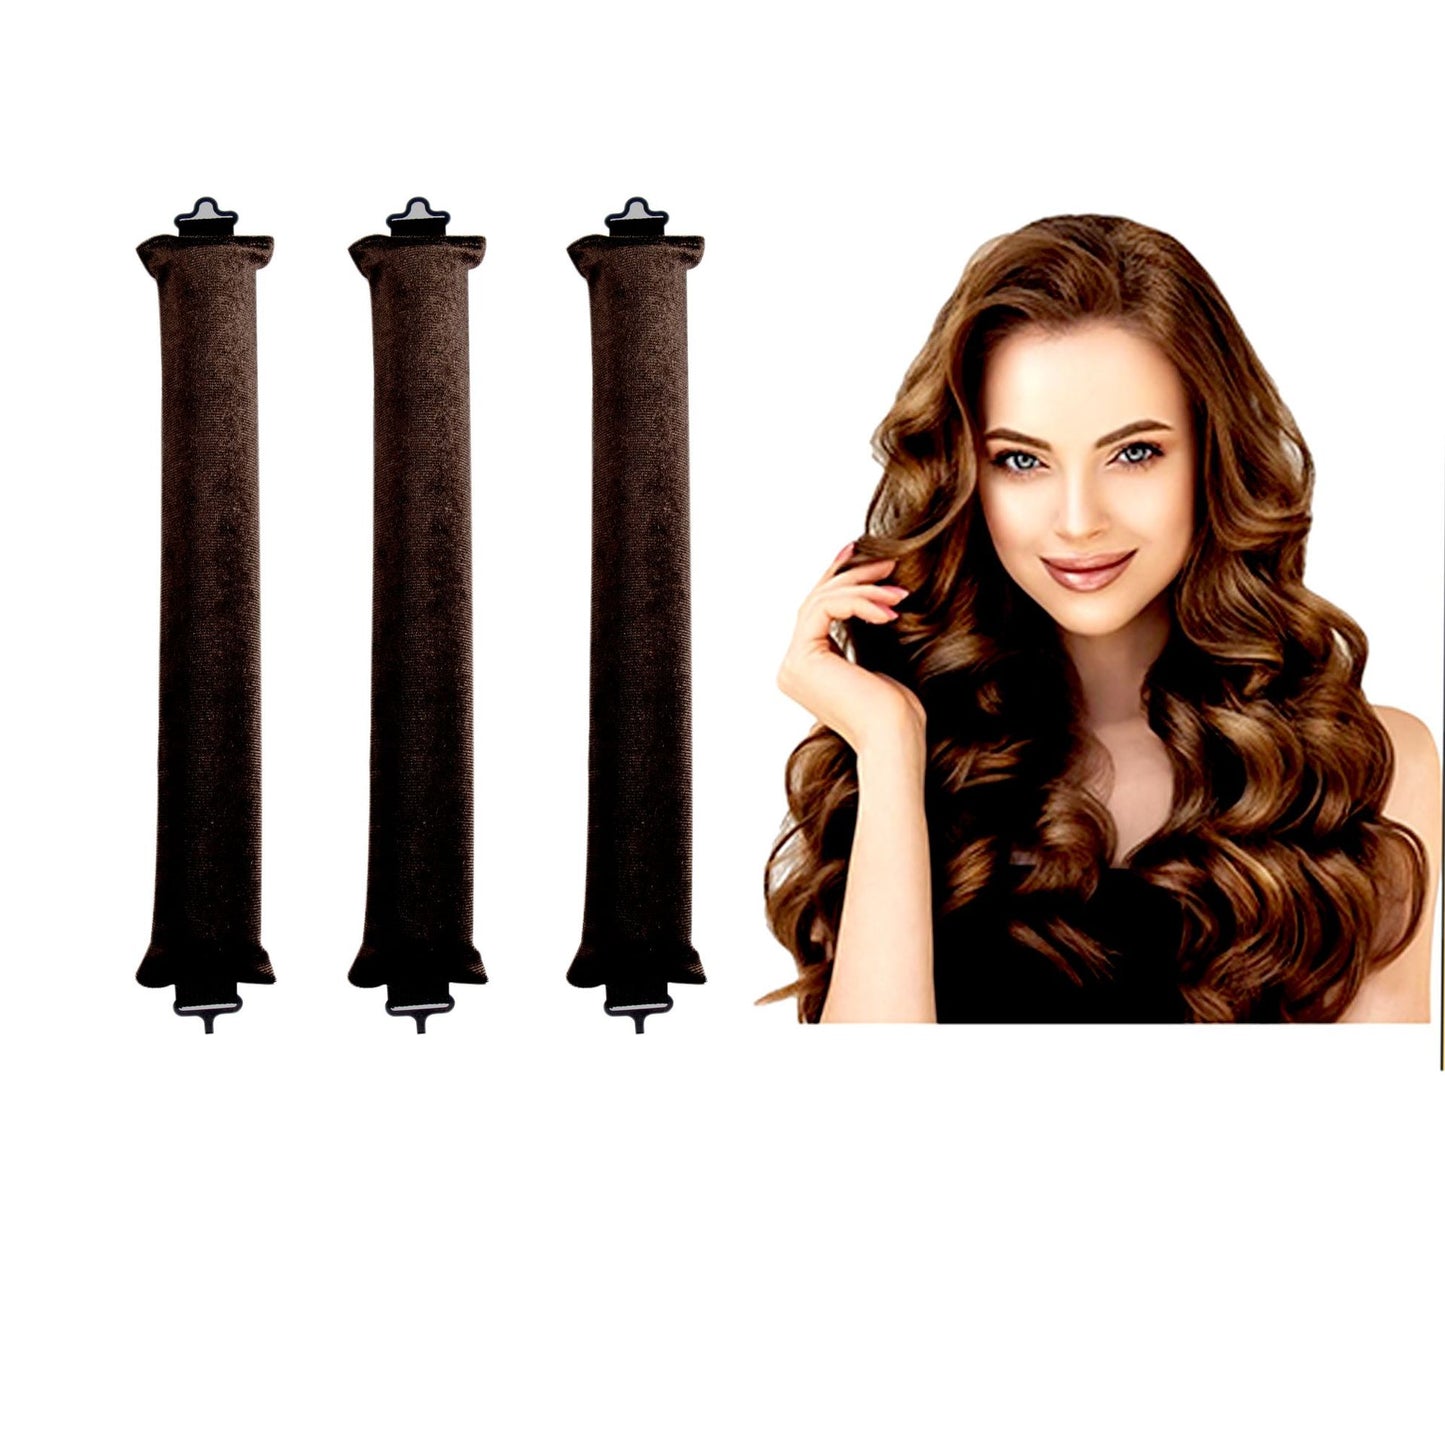 Thick 3cm Sleep Hair Curler Suitable For Dry Hair Heatless Hair Curlers for Long and Medium Hair,Silk Curls Headband with Gift Box,Satin Curling Rod Headband,No Heat Rollers to Sleep in Overnight